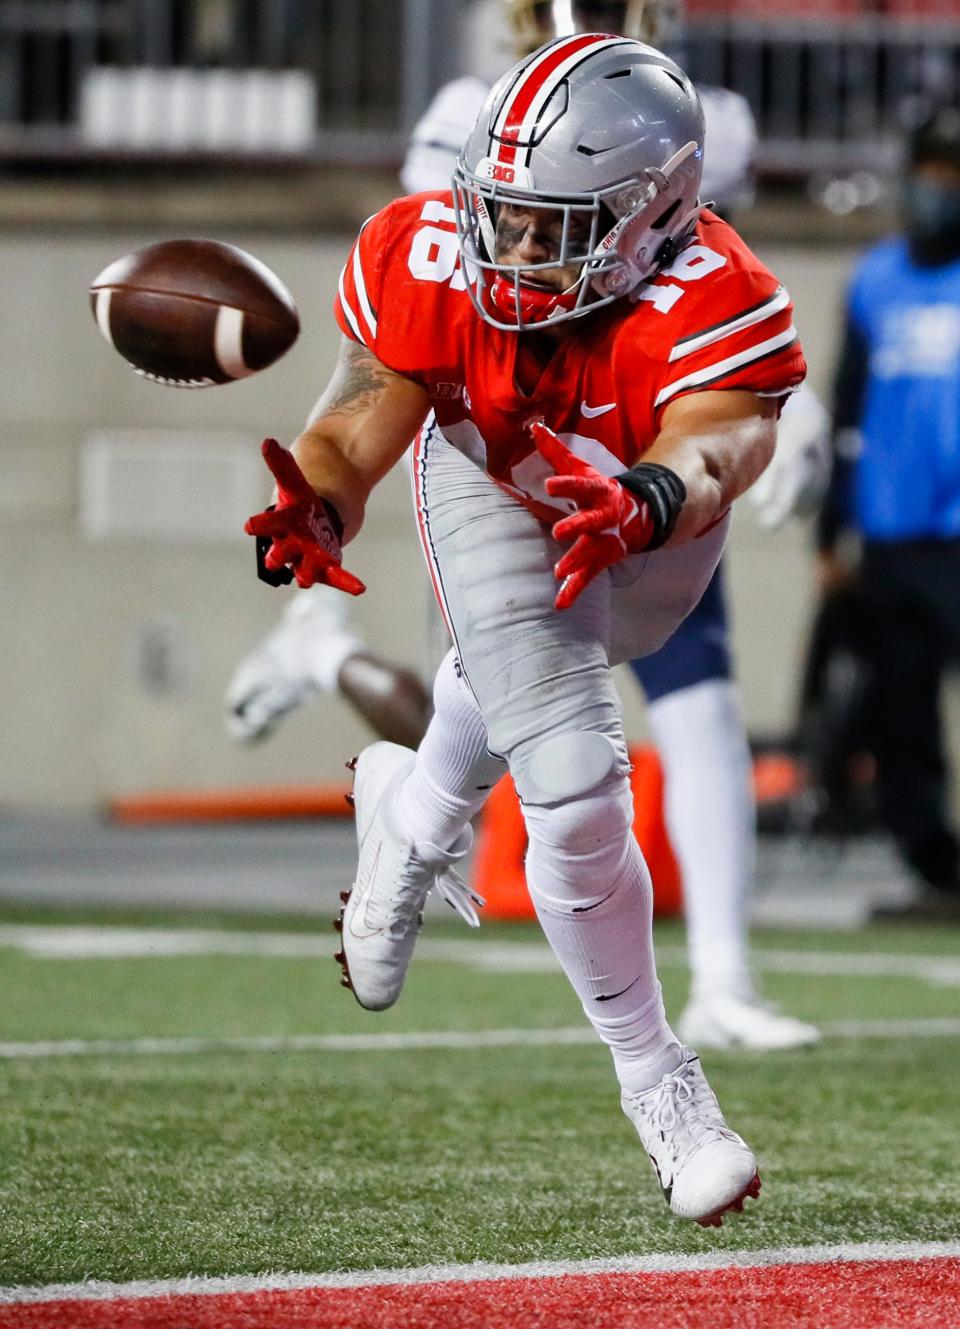 Ohio State Buckeyes tight end Cade Stover (16) can't catch a pass in the end zone during the third quarter of a NCAA Division I football game between the Ohio State Buckeyes and the Akron Zips on Saturday, Sept. 25, 2021 at Ohio Stadium in Columbus, Ohio.